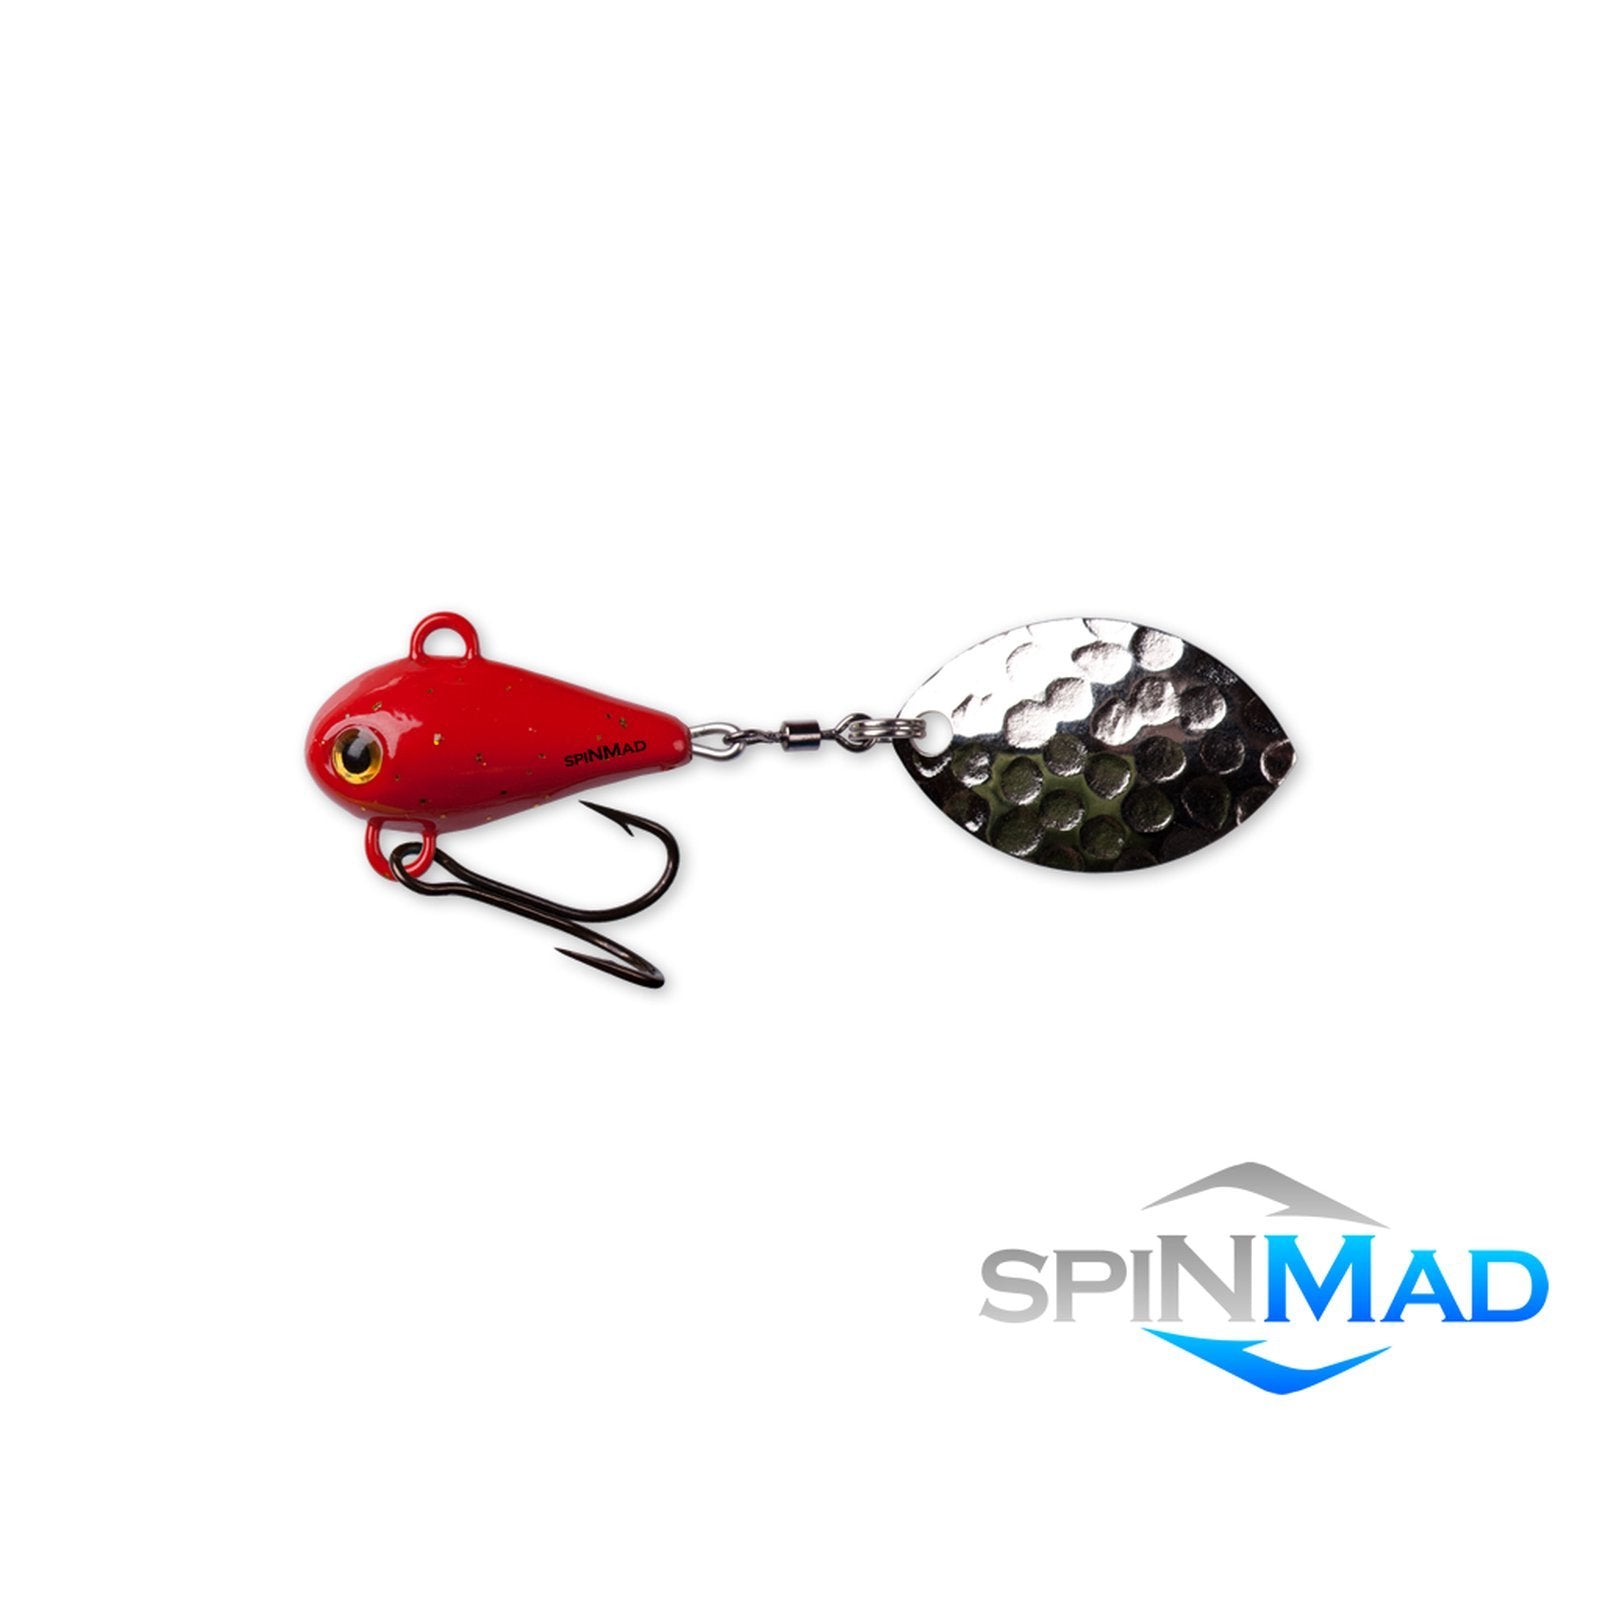 SpinMad MAG 6 0703